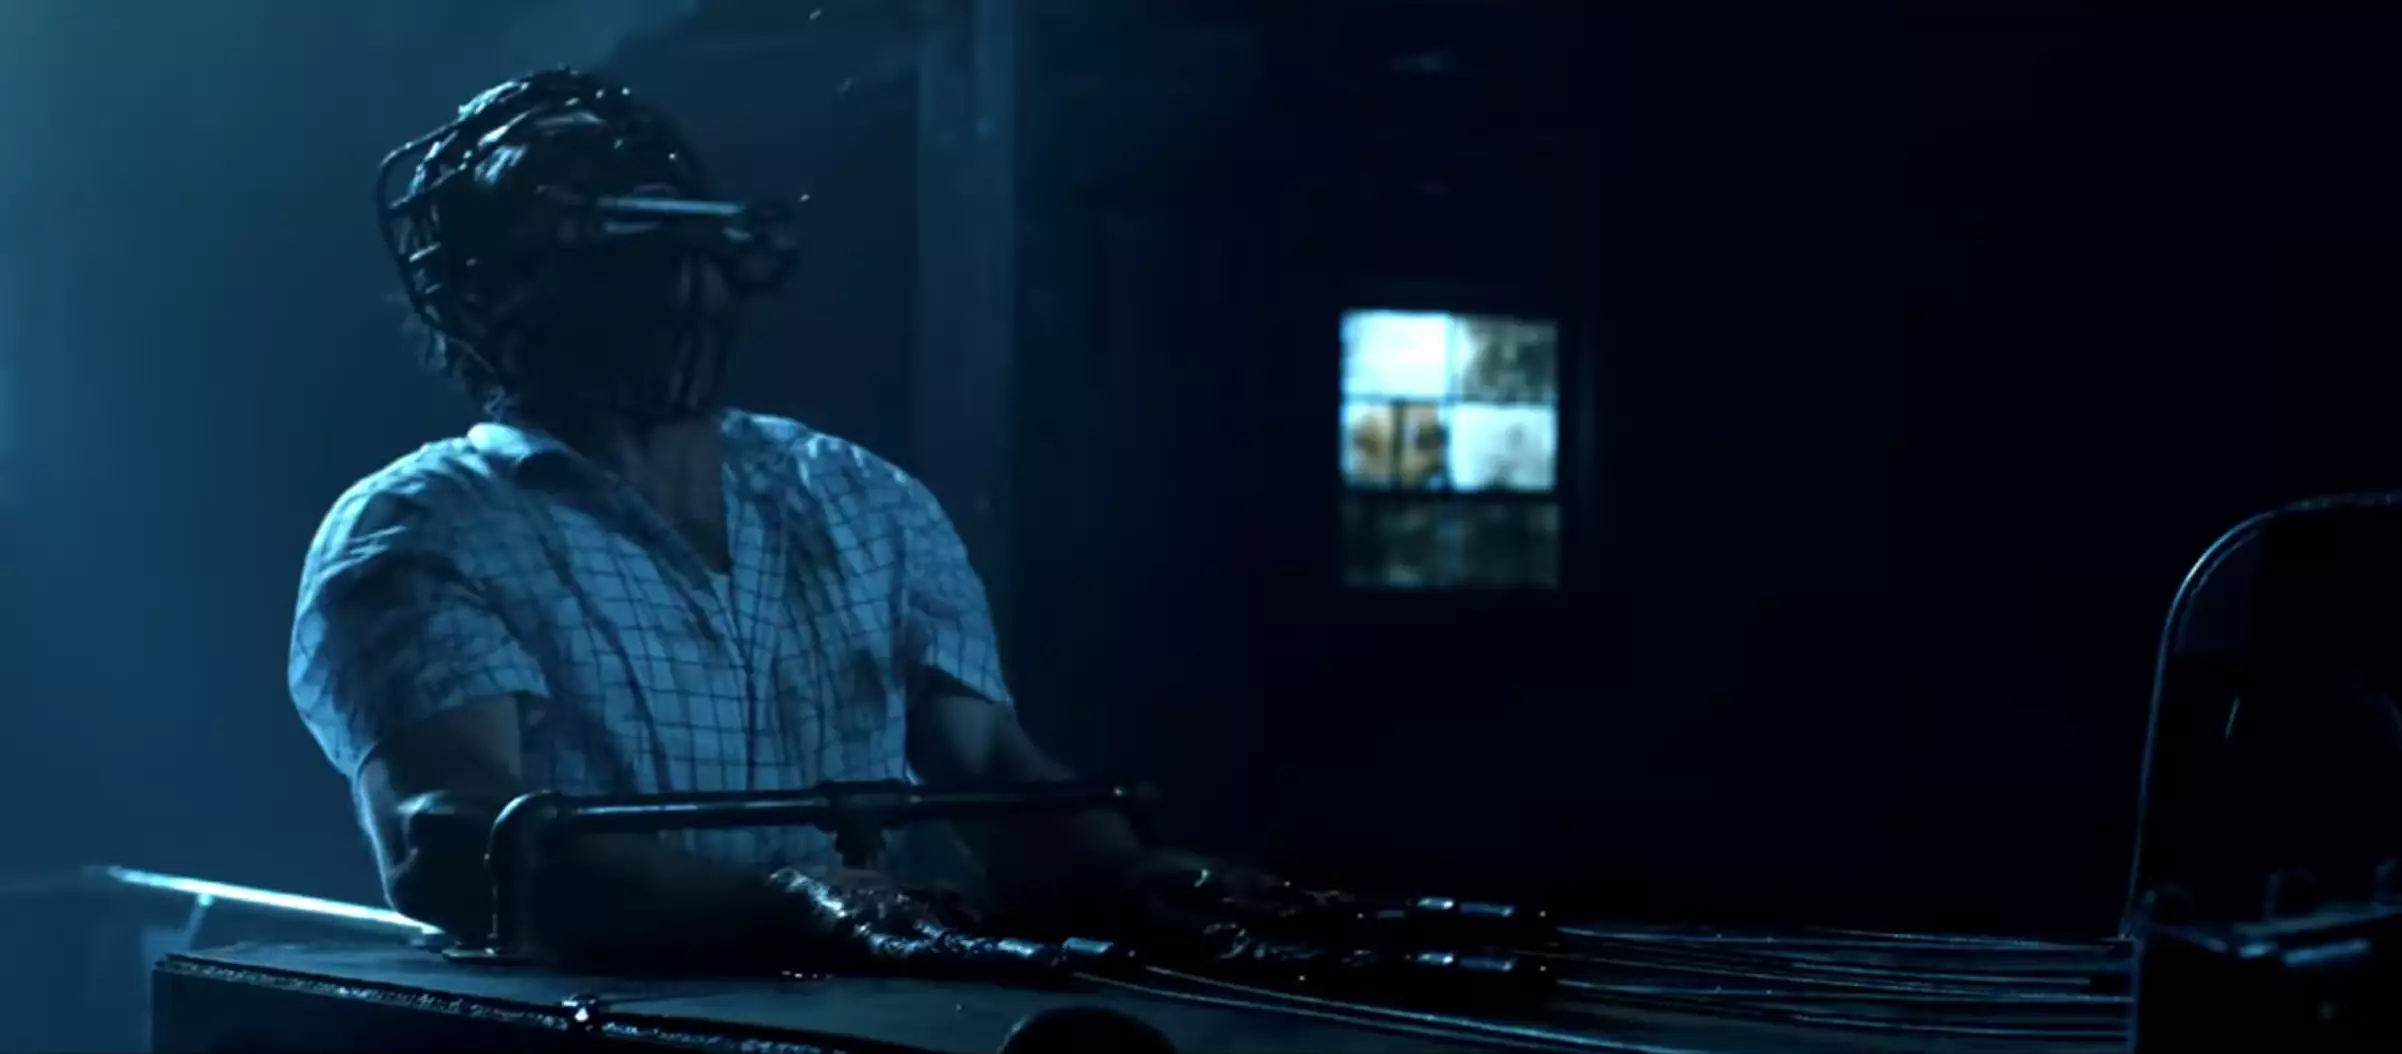 We spotted yet more sick contraptions in the trailer bringing memories back of Saw (